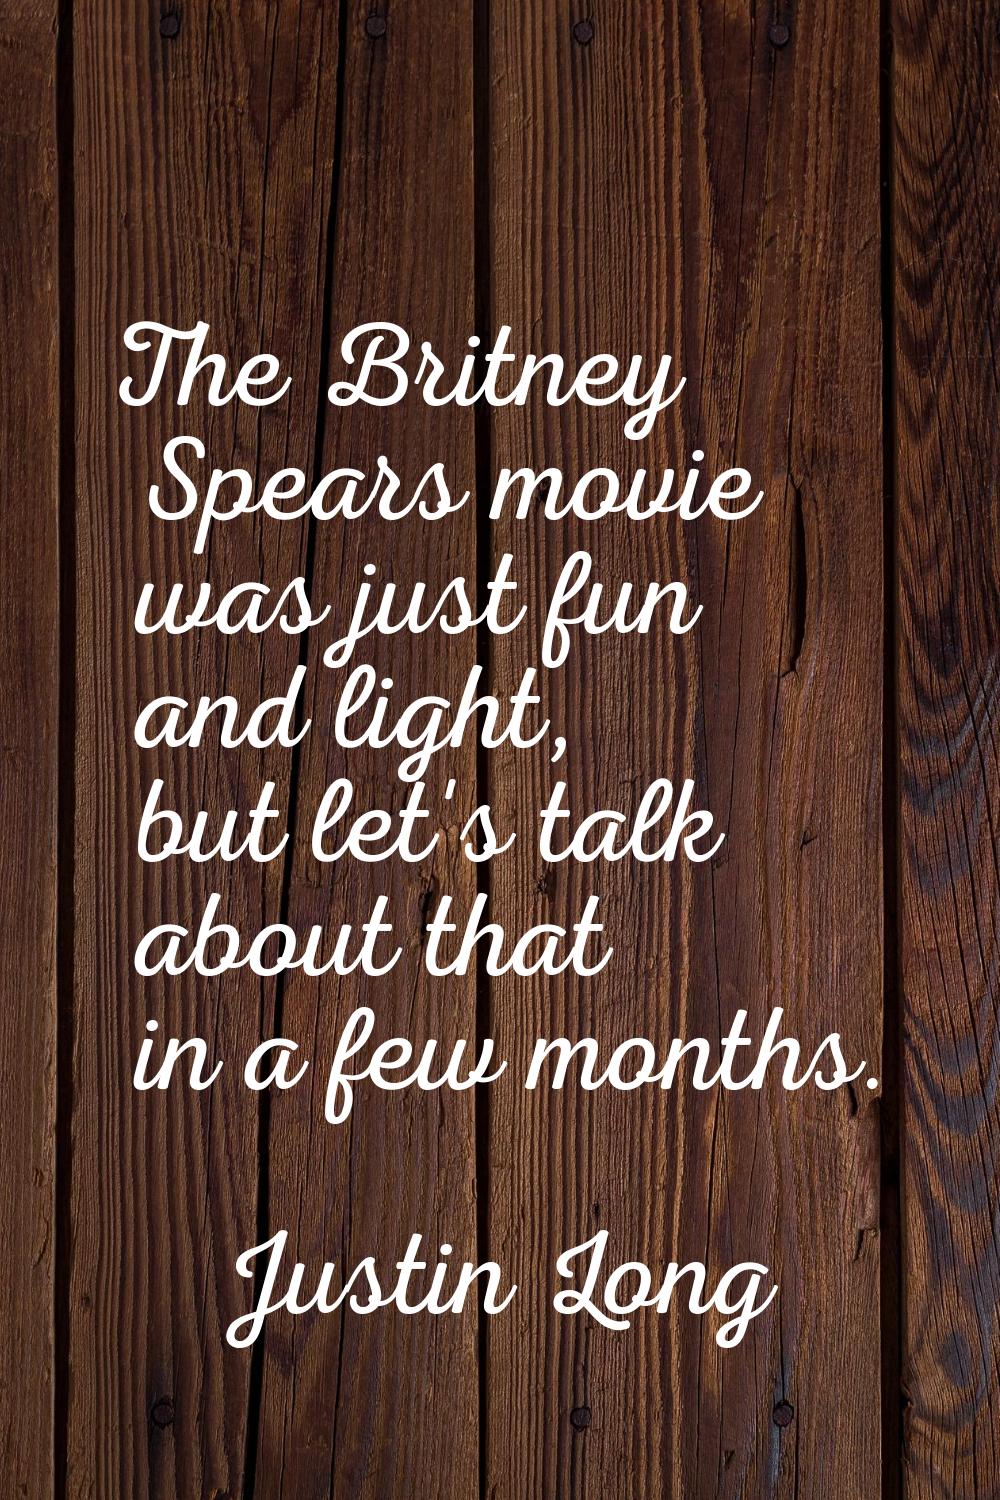 The Britney Spears movie was just fun and light, but let's talk about that in a few months.